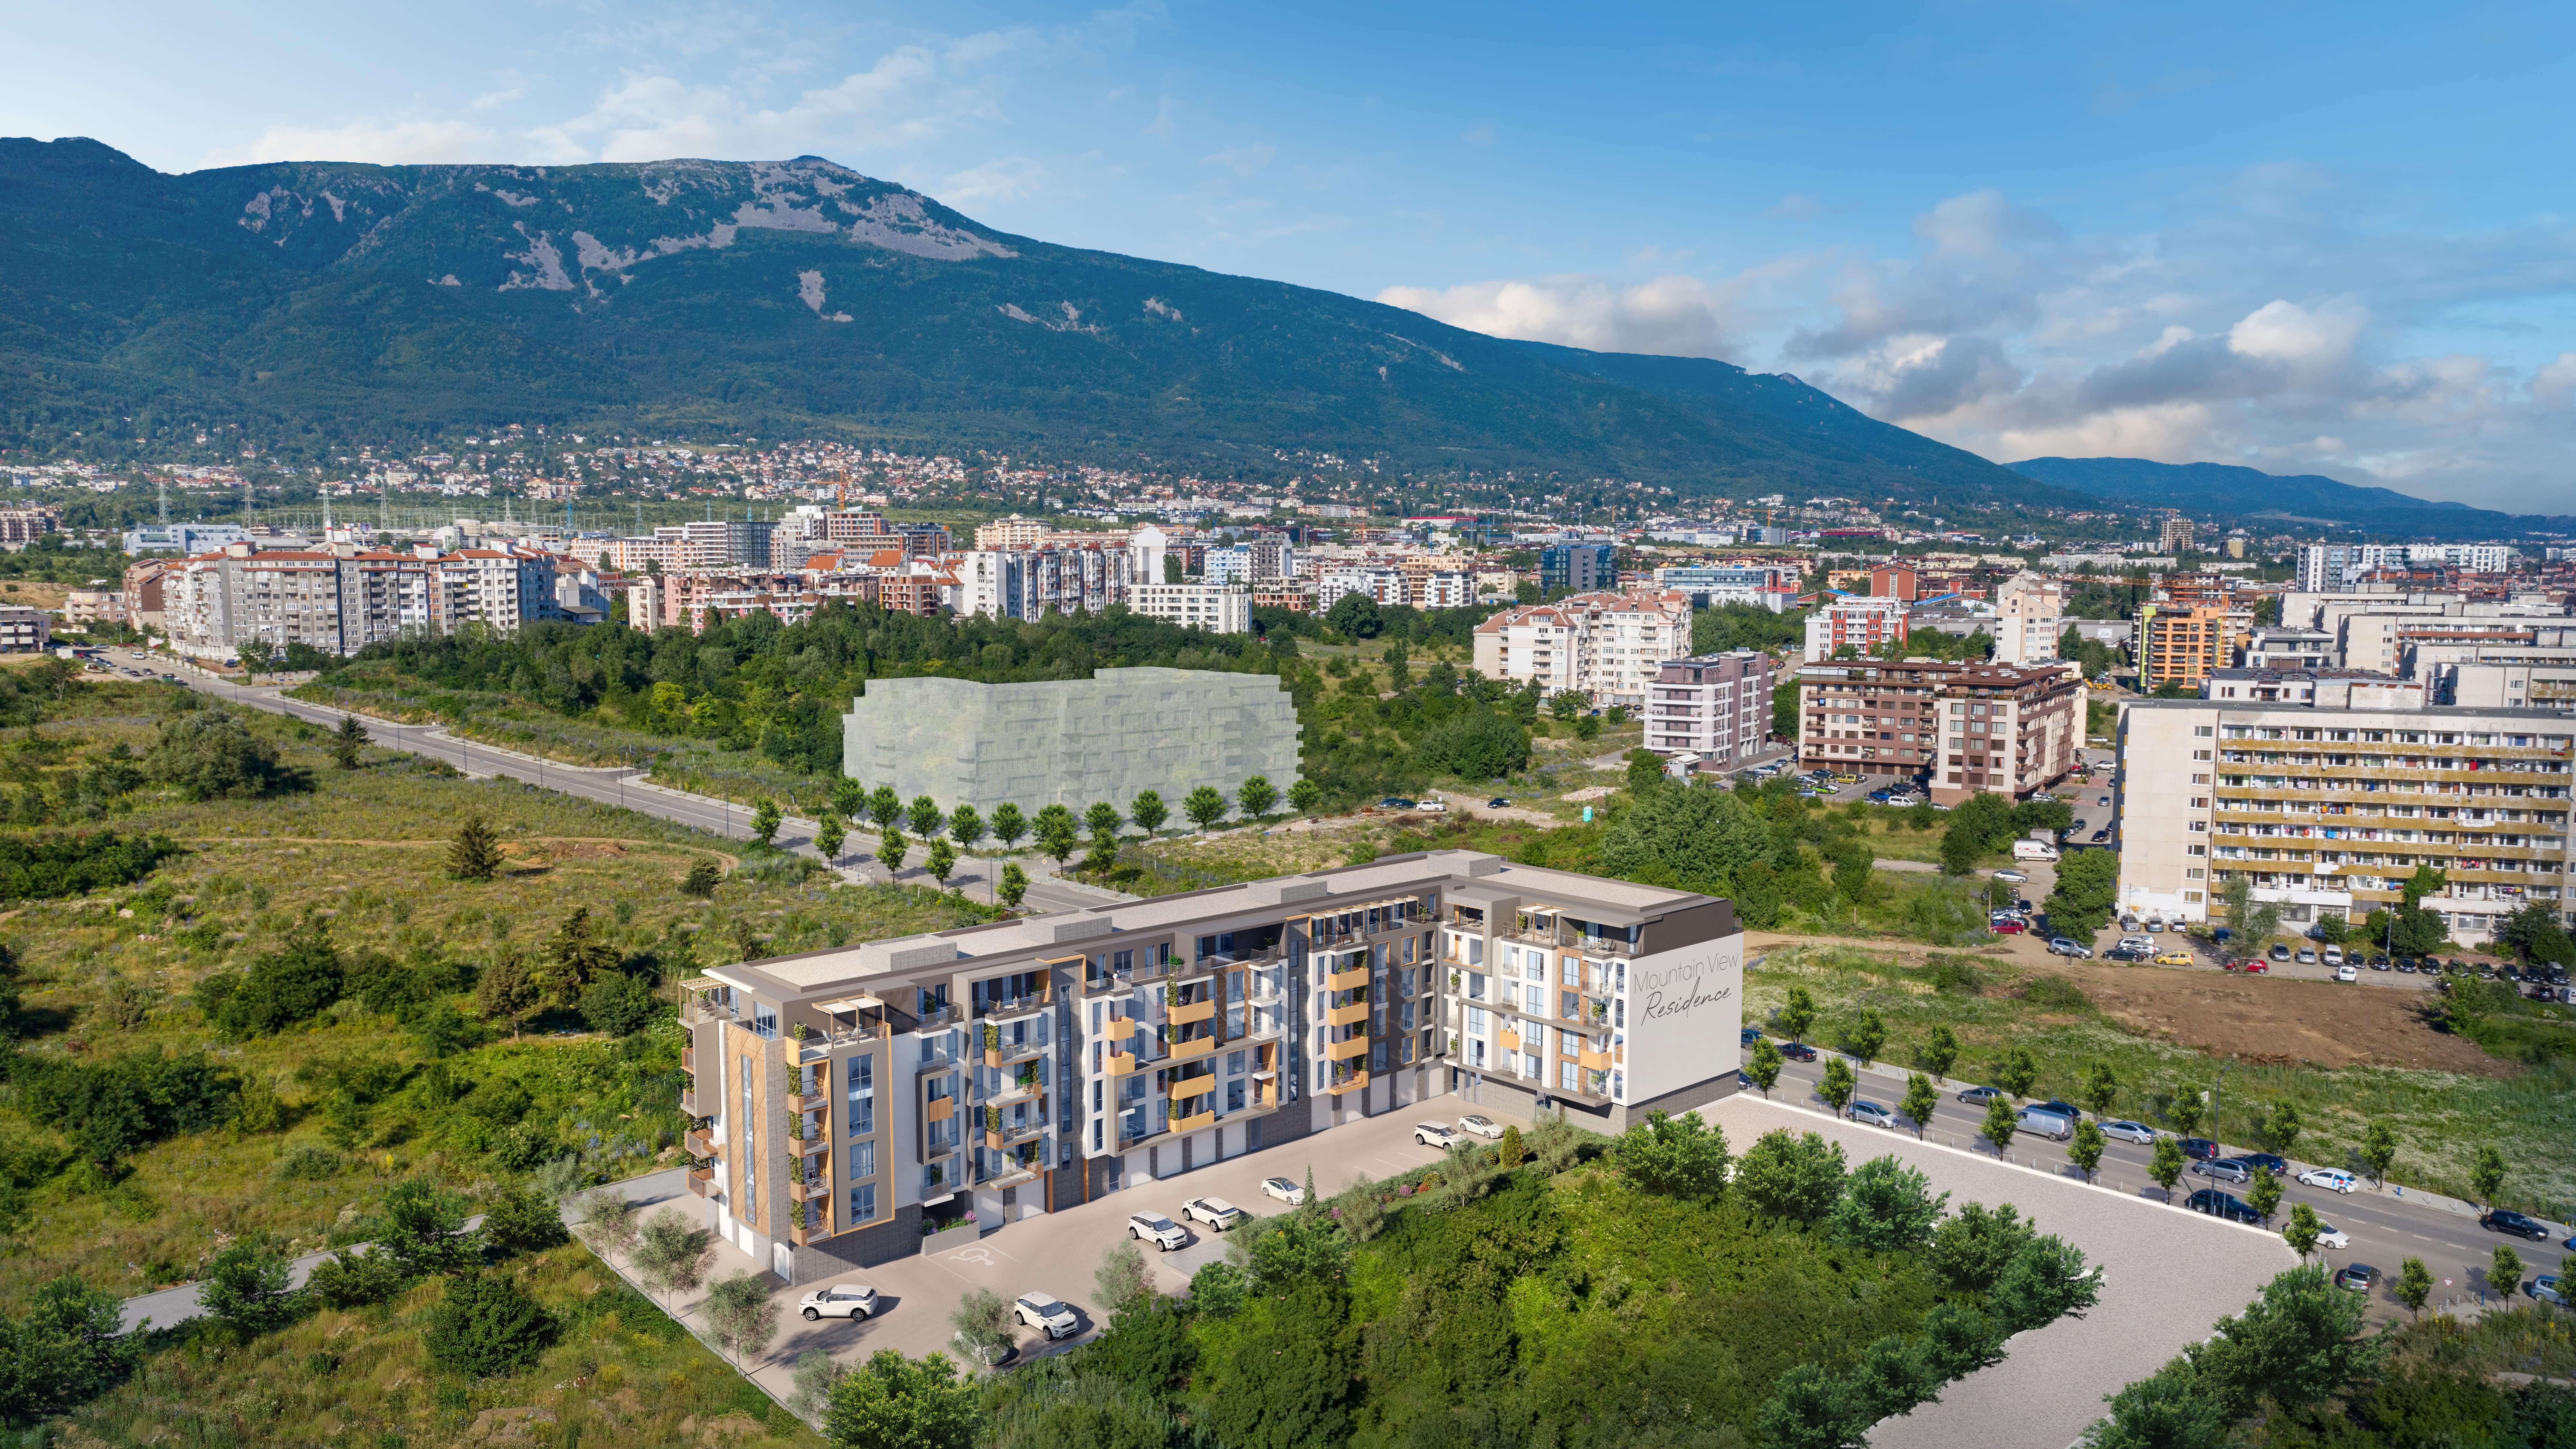 Mountain View Residence - apartments for SALE in Malinova Dolina district, Sofia